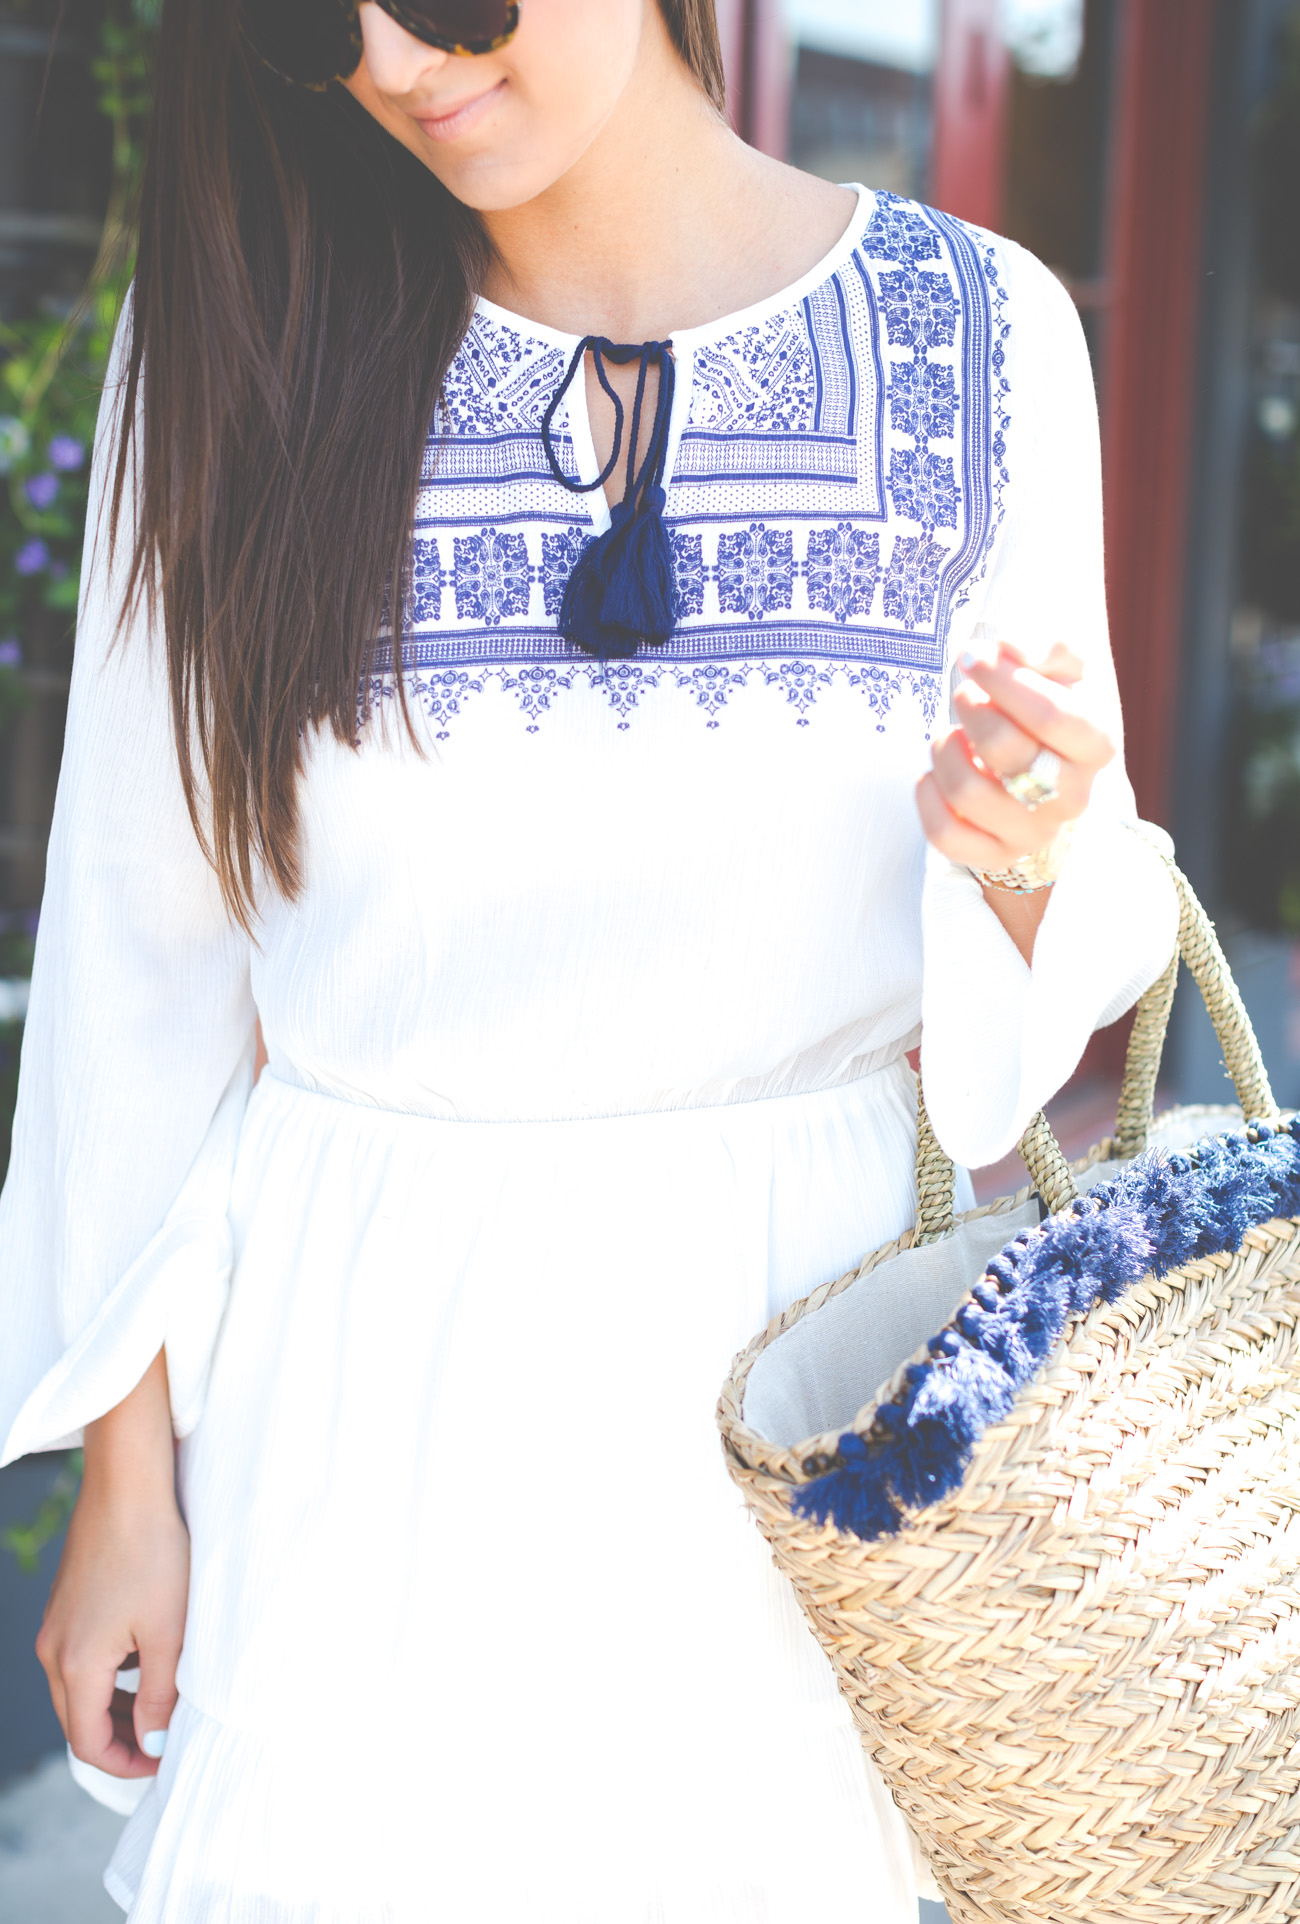 embroidered white dress, tassel white dress, white and navy dress, white summer dress, little white dress, ruffle white dress, white ruffle dress, tassel tote, tassel outfit, straw tote, straw tassel tote, hat attack tassel straw tote, charleston south carolina, preppy outfit, preppy fashion, spring fashion, spring style, embroidered outfit, wilde heart fine china dress // grace wainwright from a southern drawl